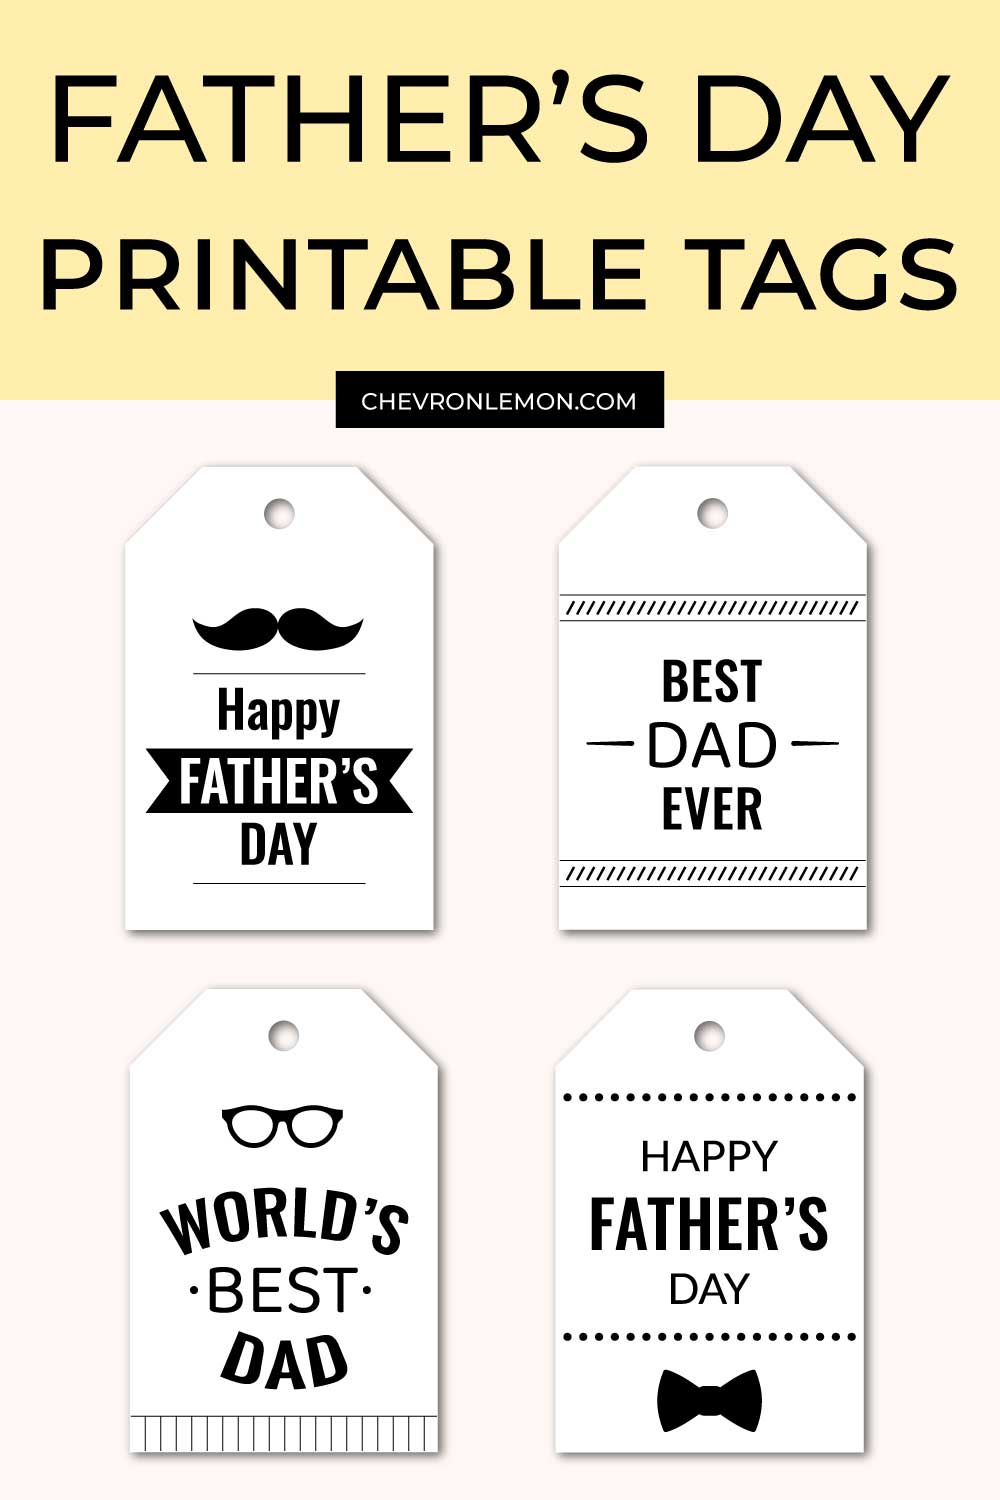 Father's Day tags pin